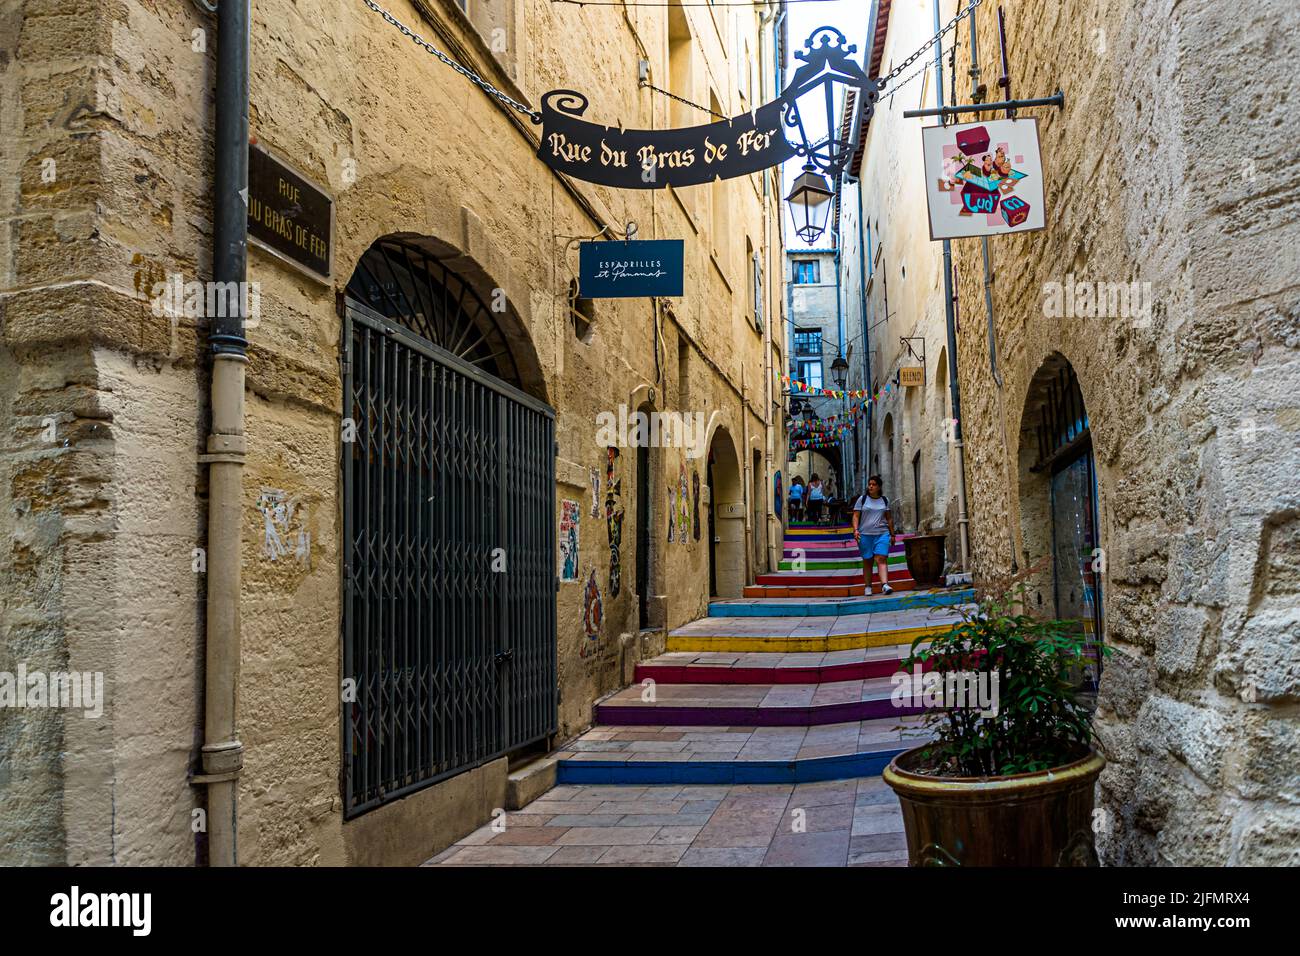 The street of the iron arm (Bras de Fer) in Montpellier, France Stock Photo